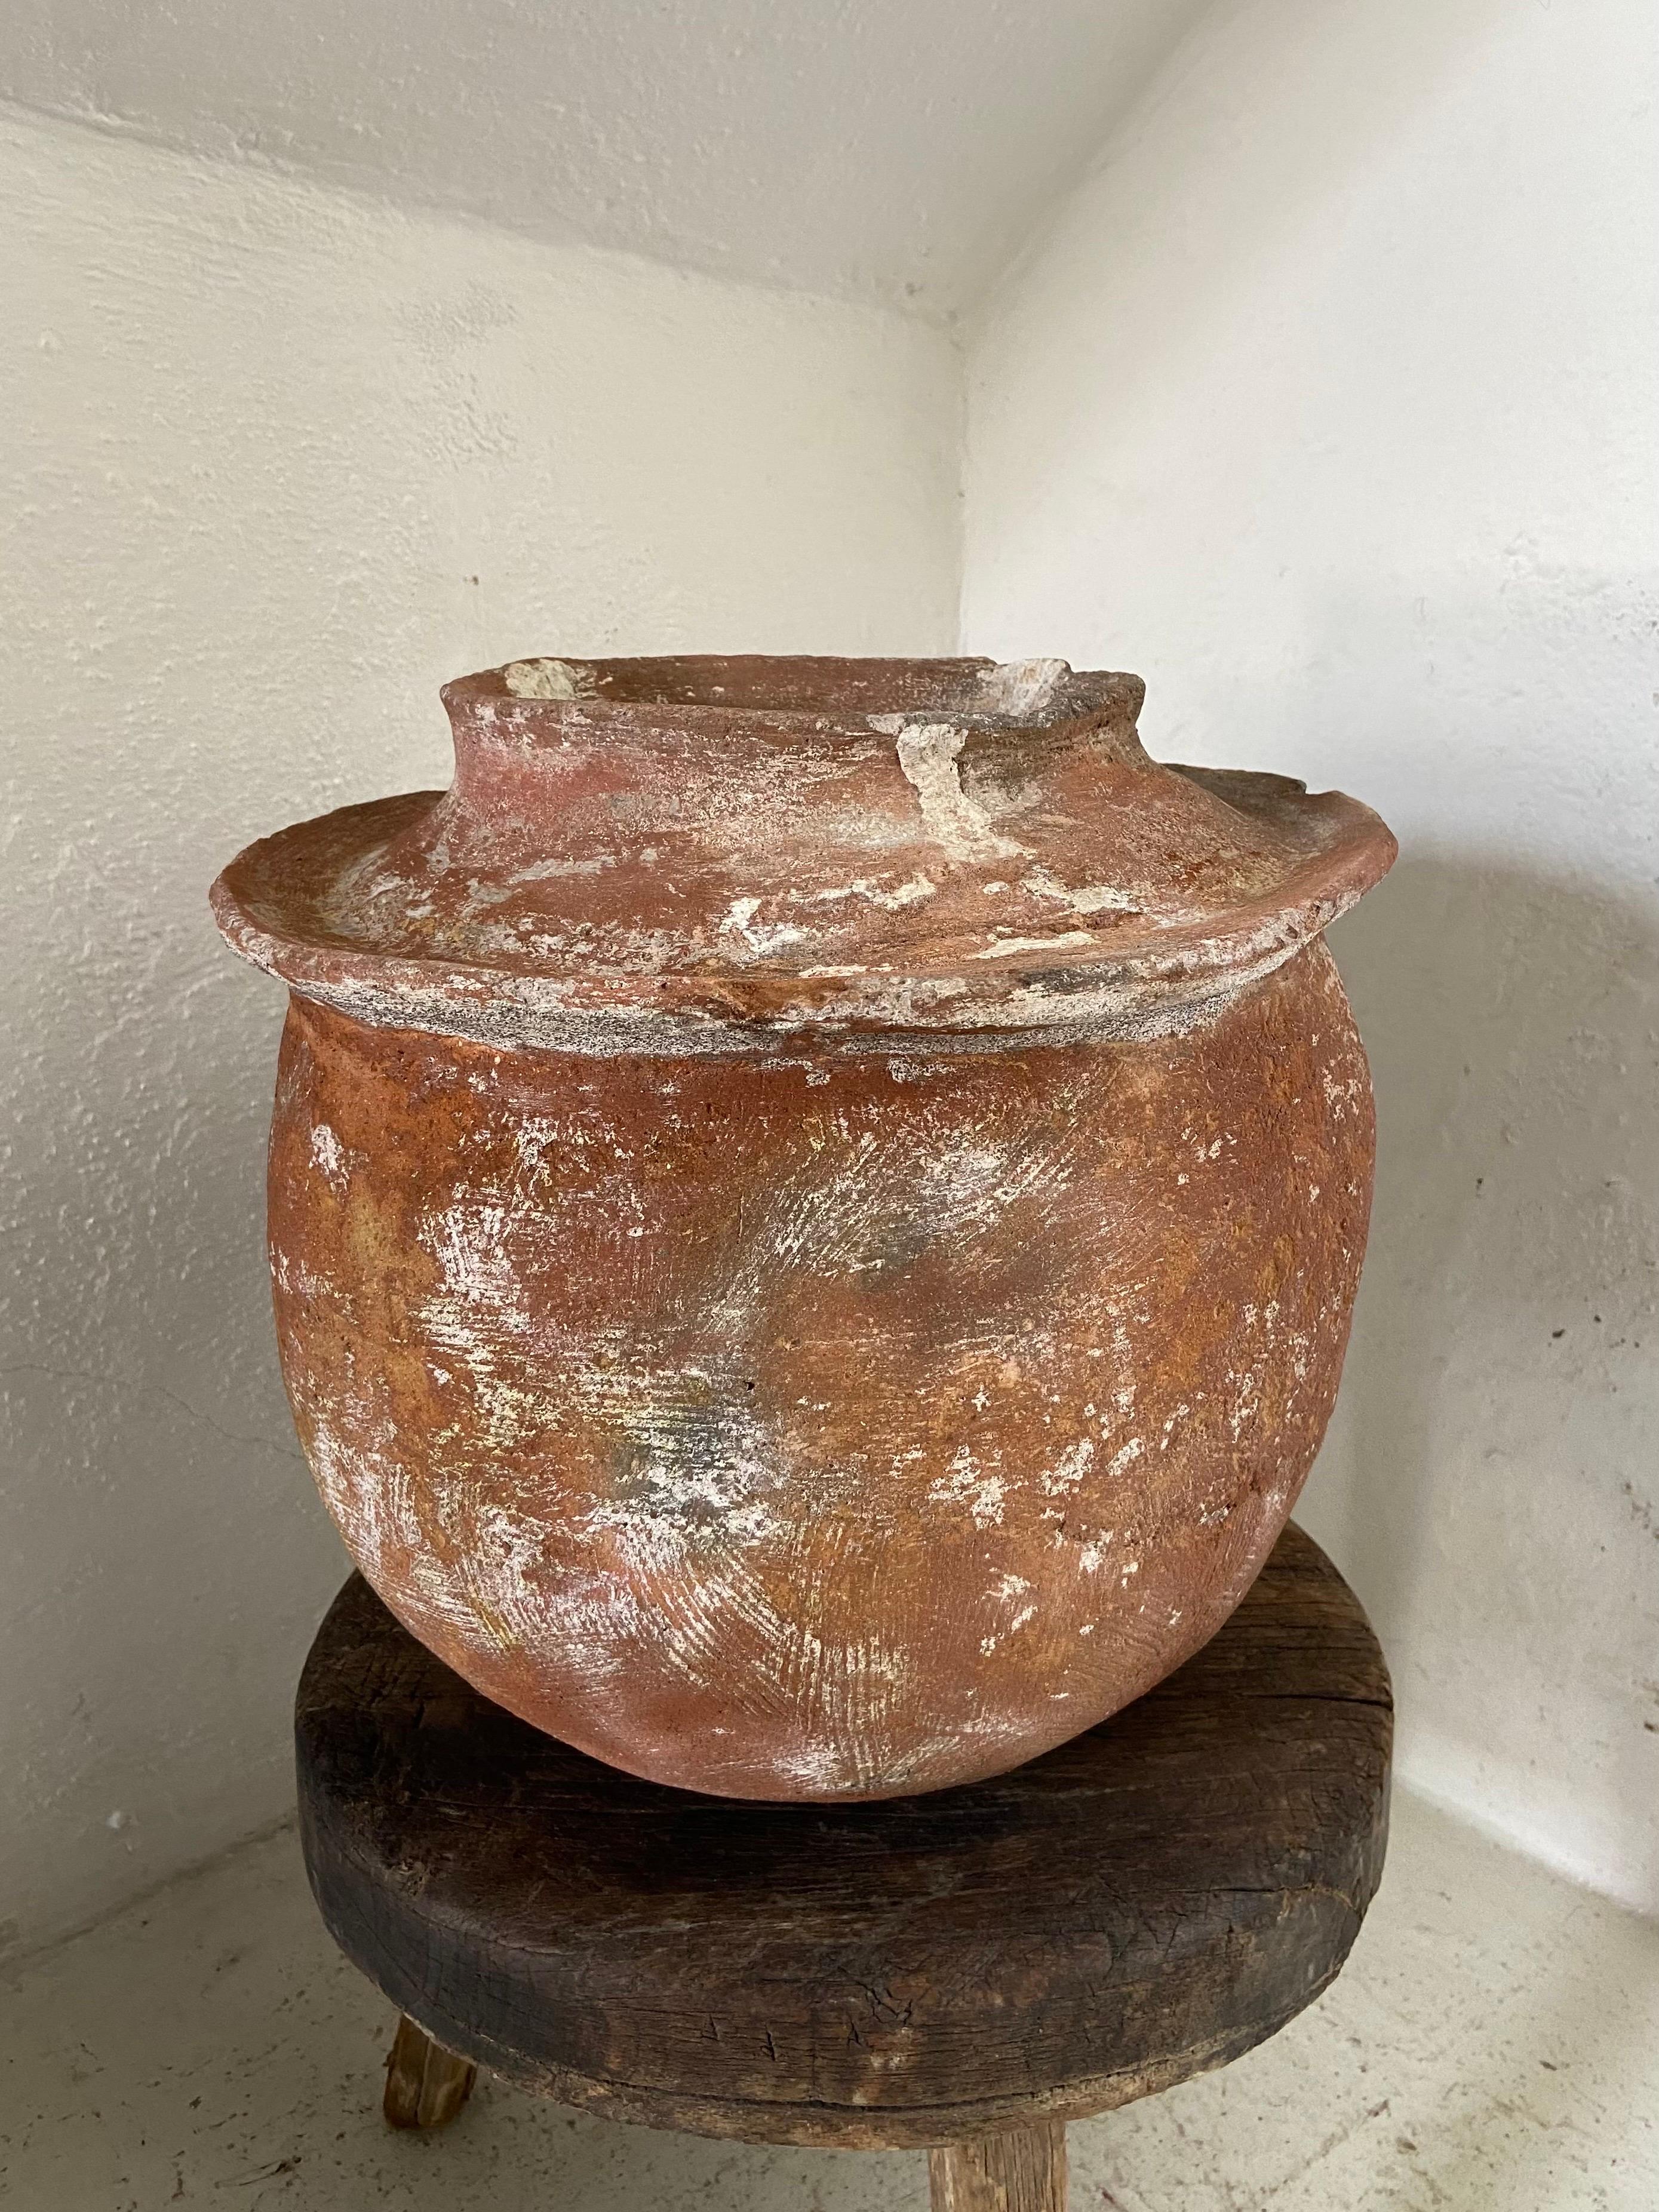 Fired Early 20th Century Terracotta Water Vessel from Mexico